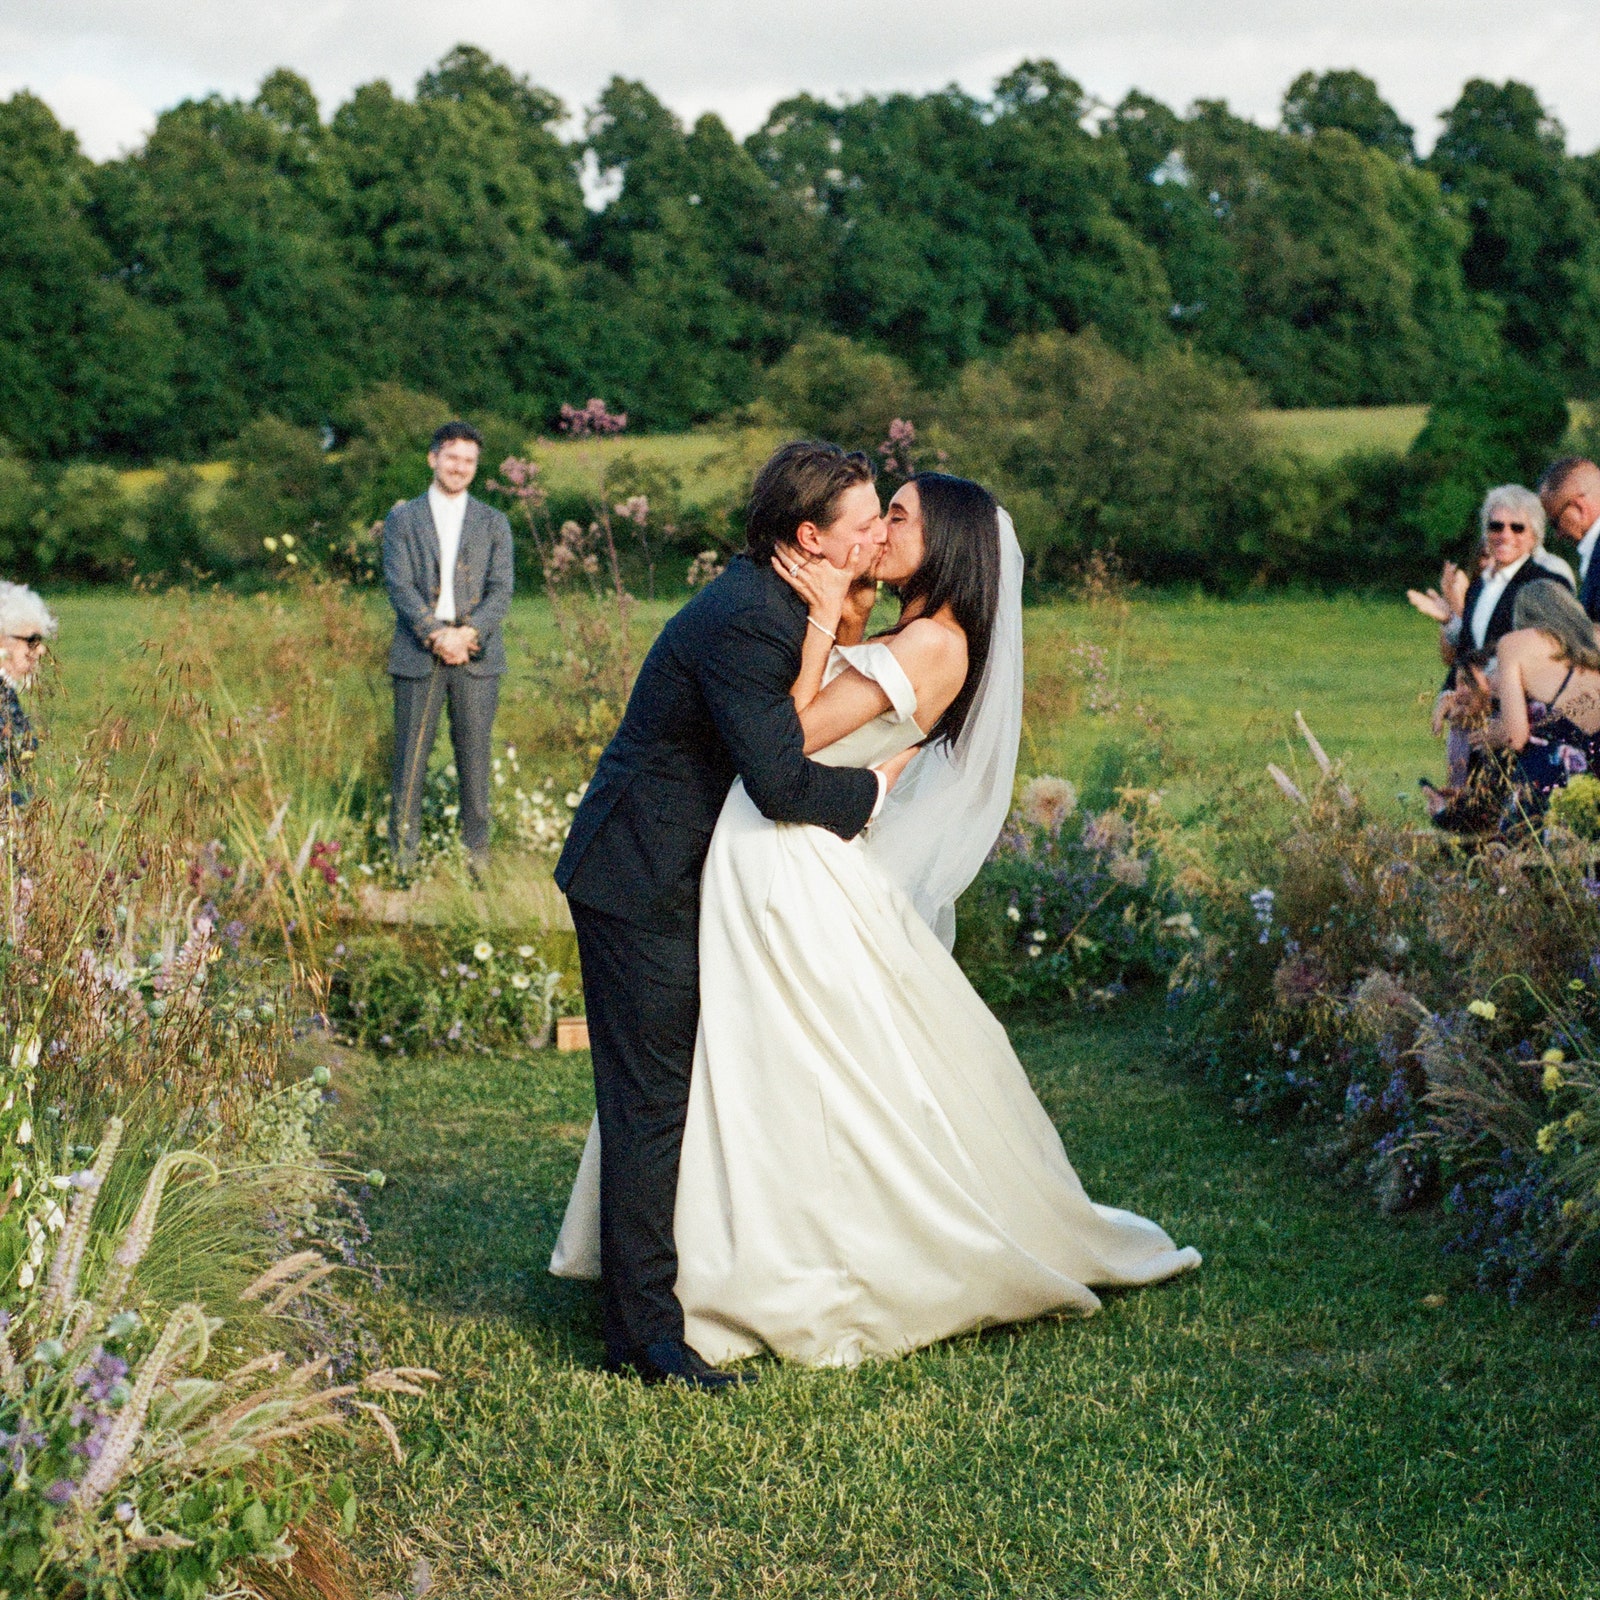 Jesse Light Wore 3 Vivienne Westwood Dresses To Marry Jesse Bongiovi Surrounded By Wildflowers In The English Countryside